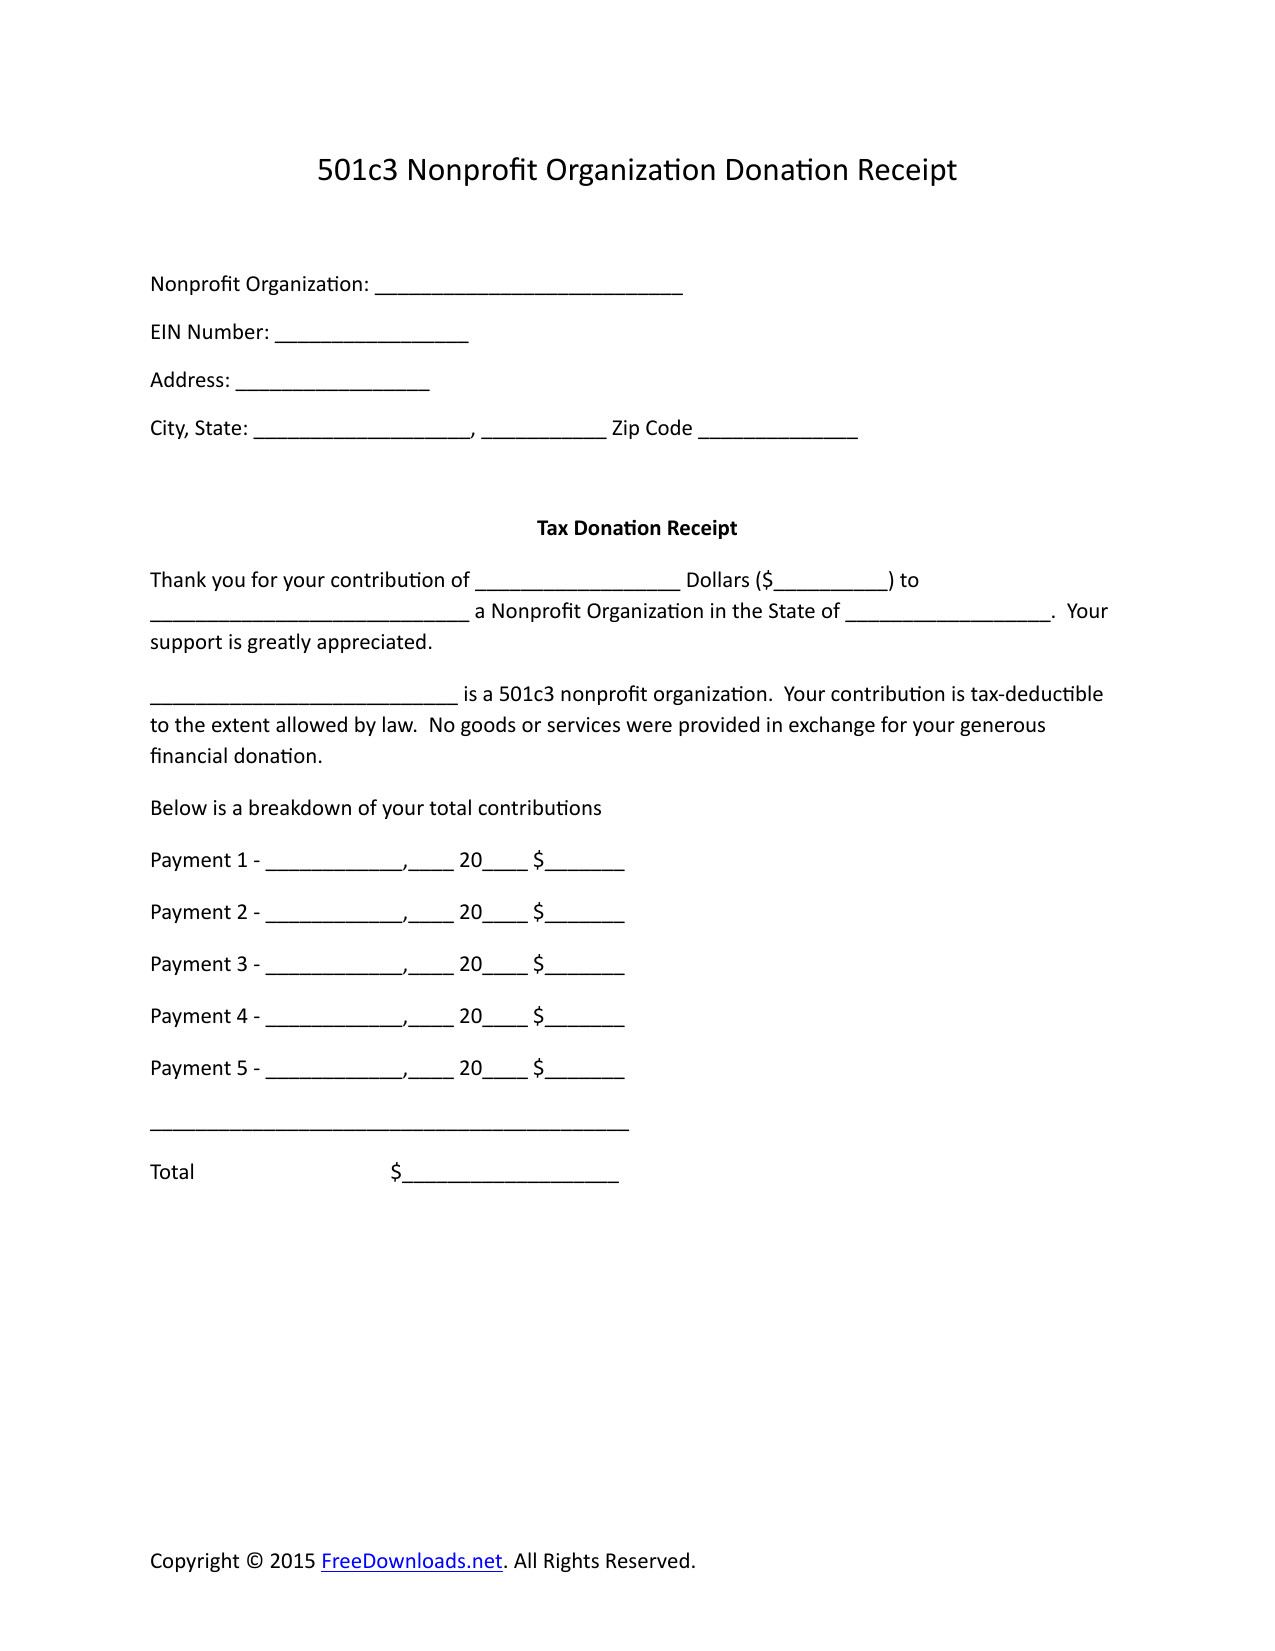 Download 501c3 Donation Receipt Letter for Tax Purposes